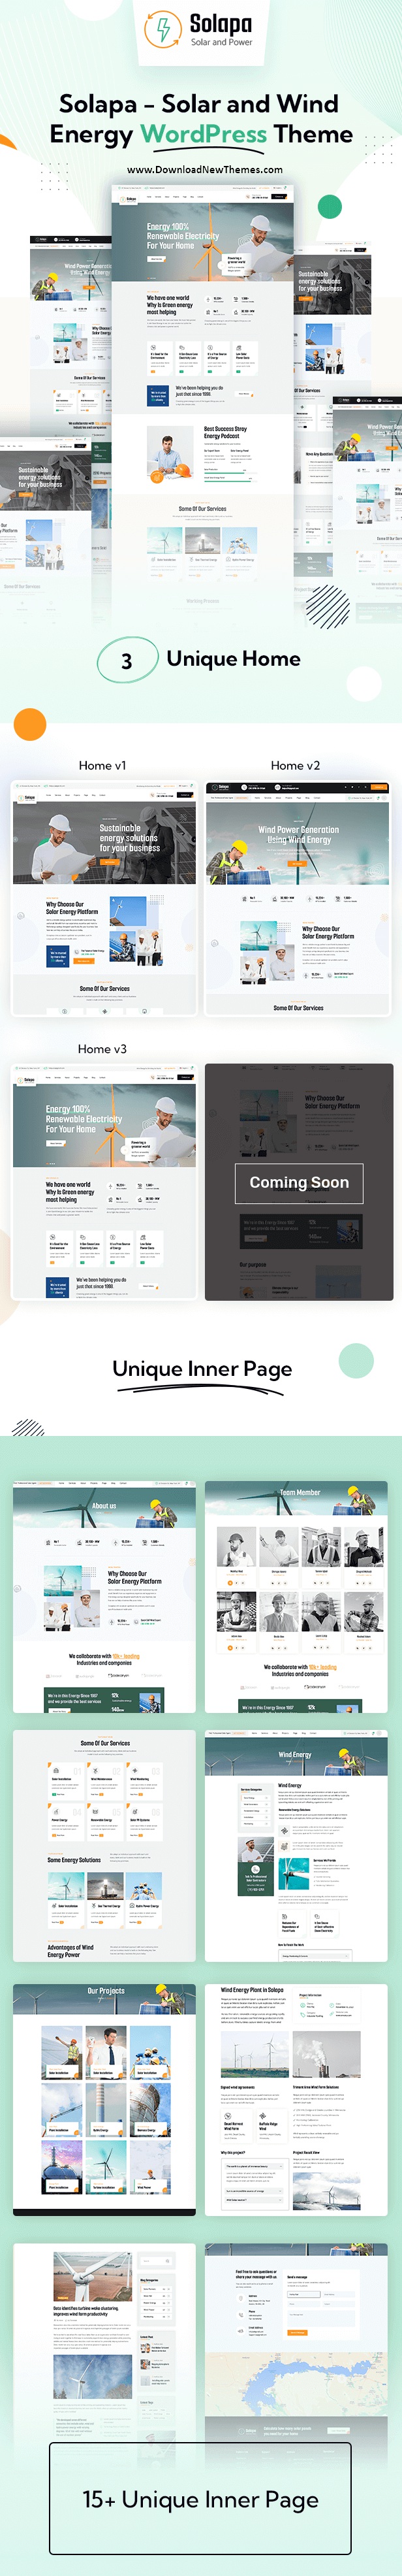 Solapa - Solar and Wind Energy WordPress Theme Review